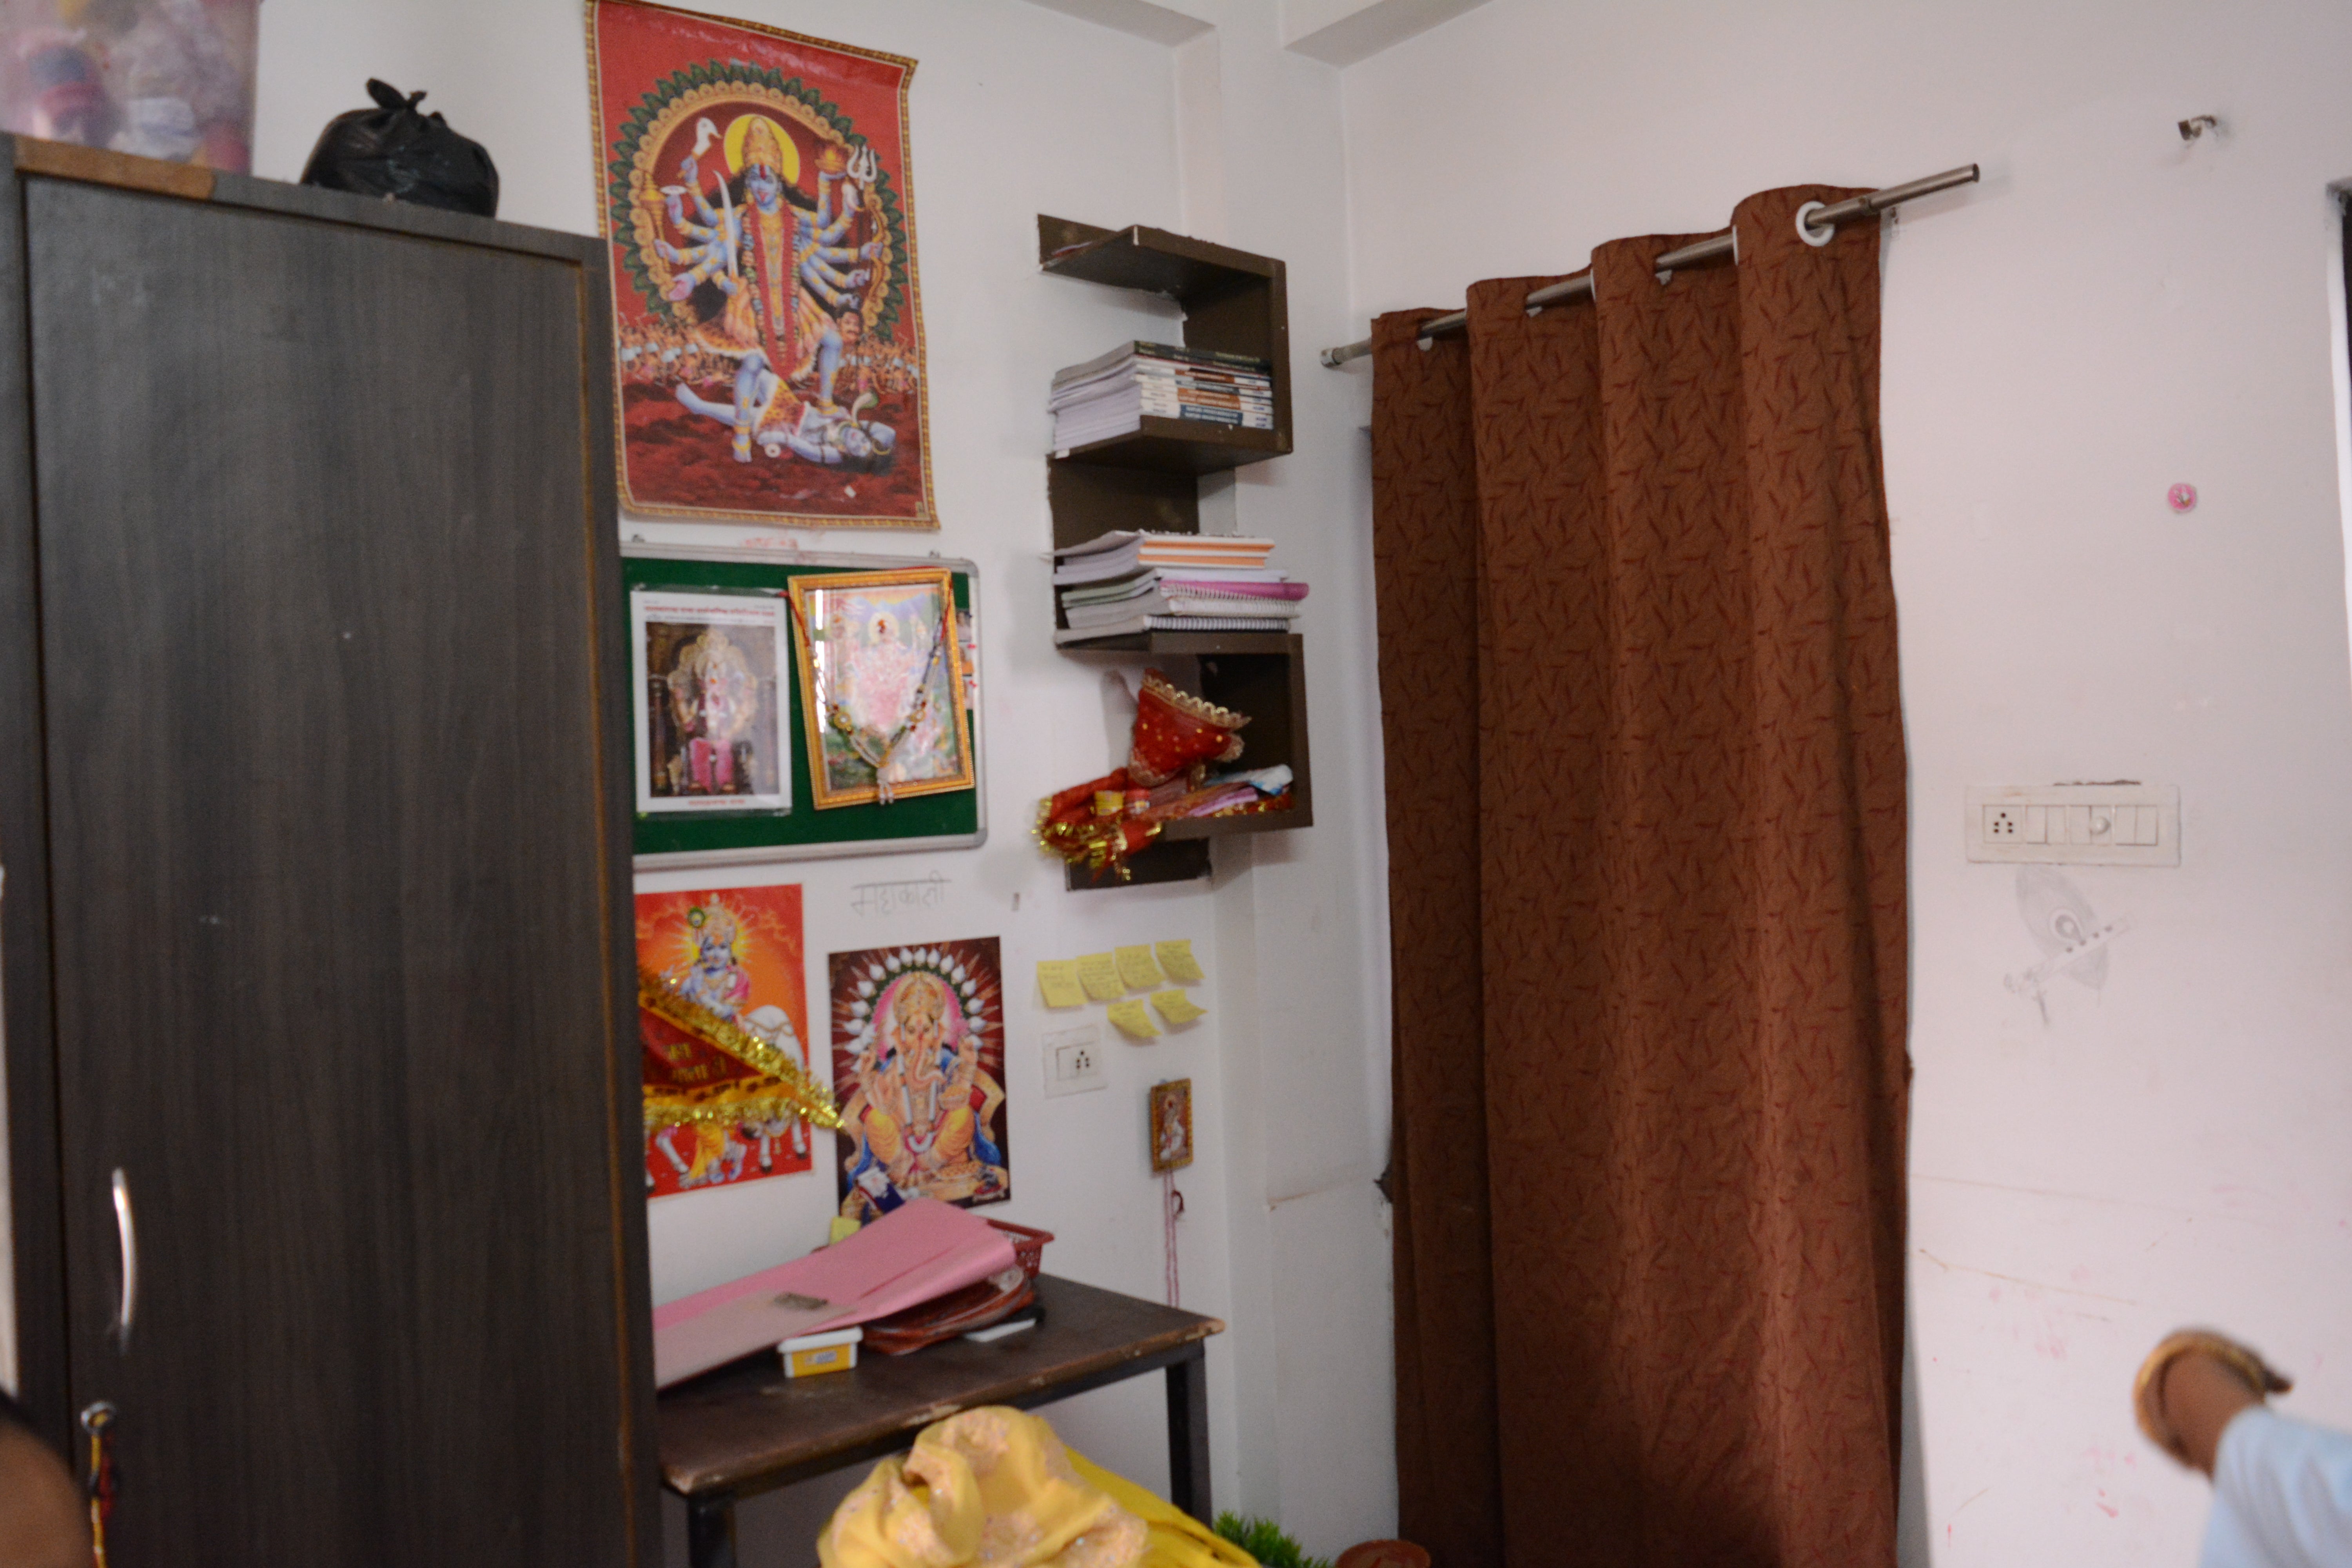 Pictures of Hindu gods and goddesses displayed above the study table of a student in Kota